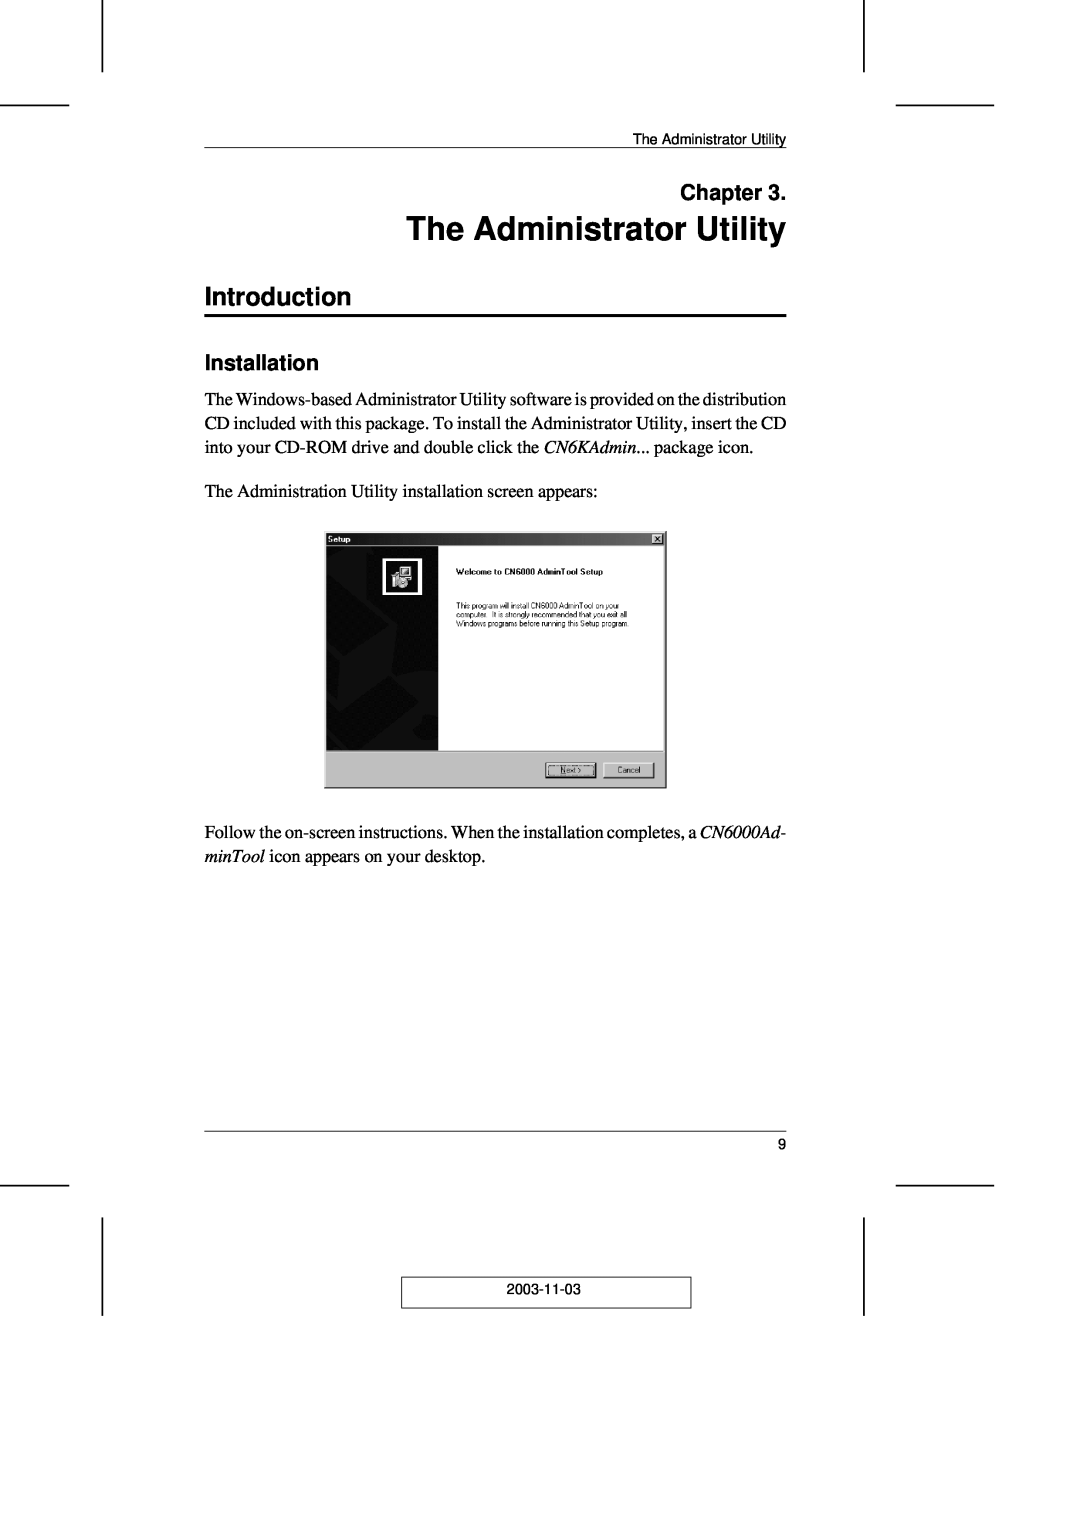 ATEN Technology CN-6000 user manual The Administrator Utility, Introduction, Installation, Chapter 